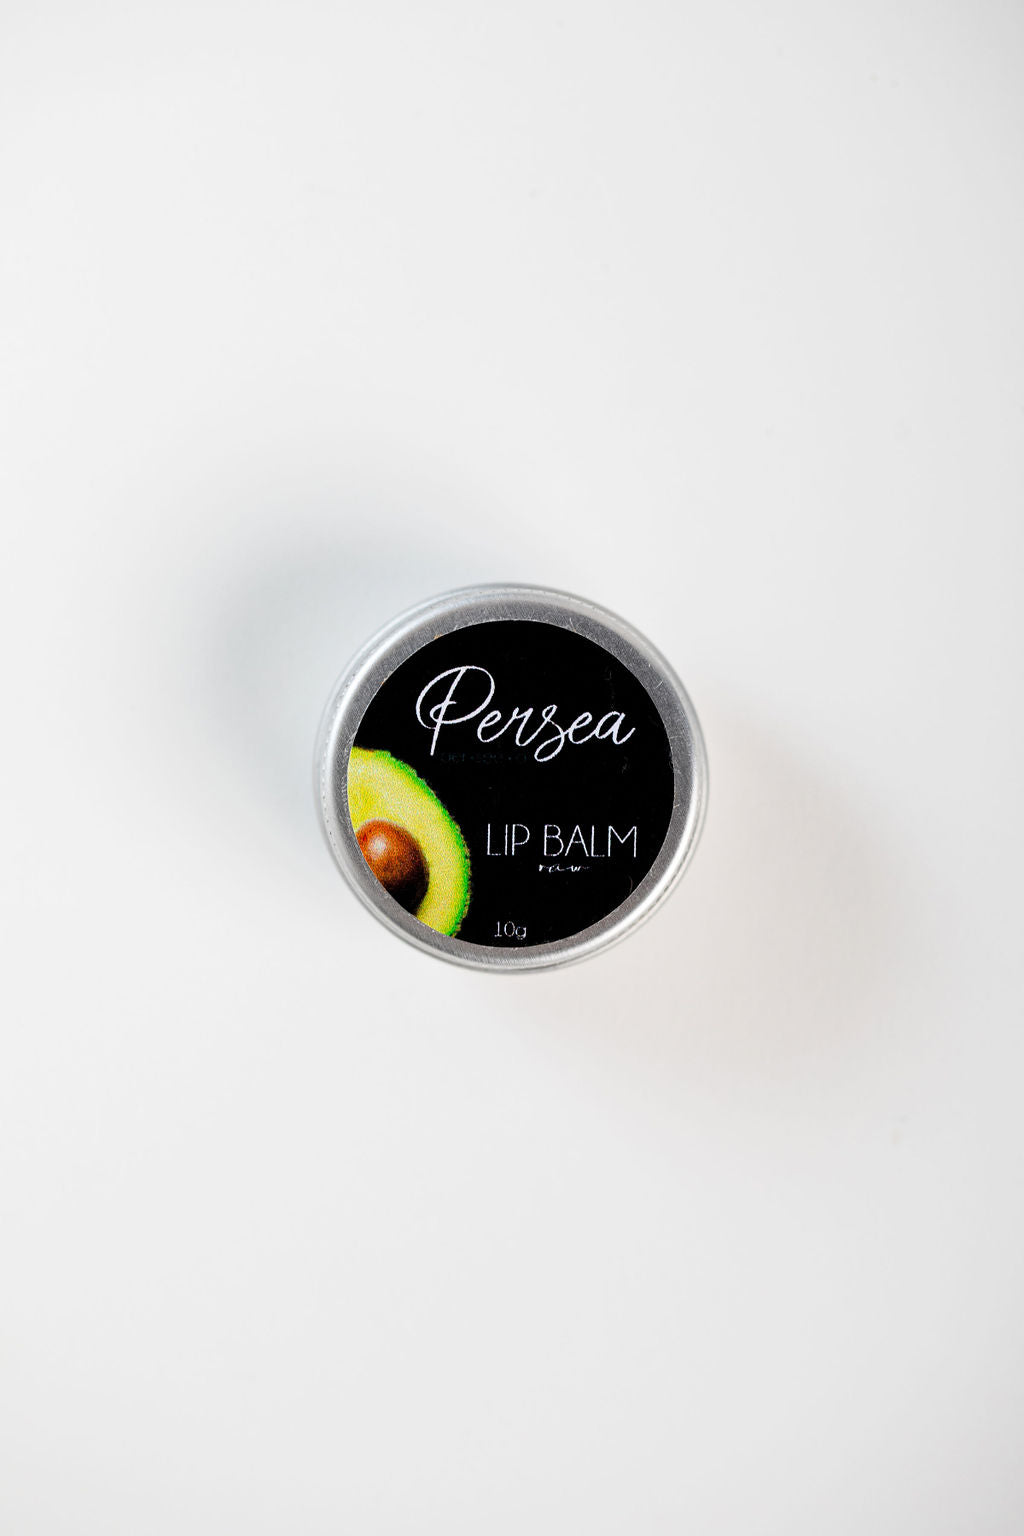 Persea Avo Lip Balm. Moisturises your lips for hours! All natural!